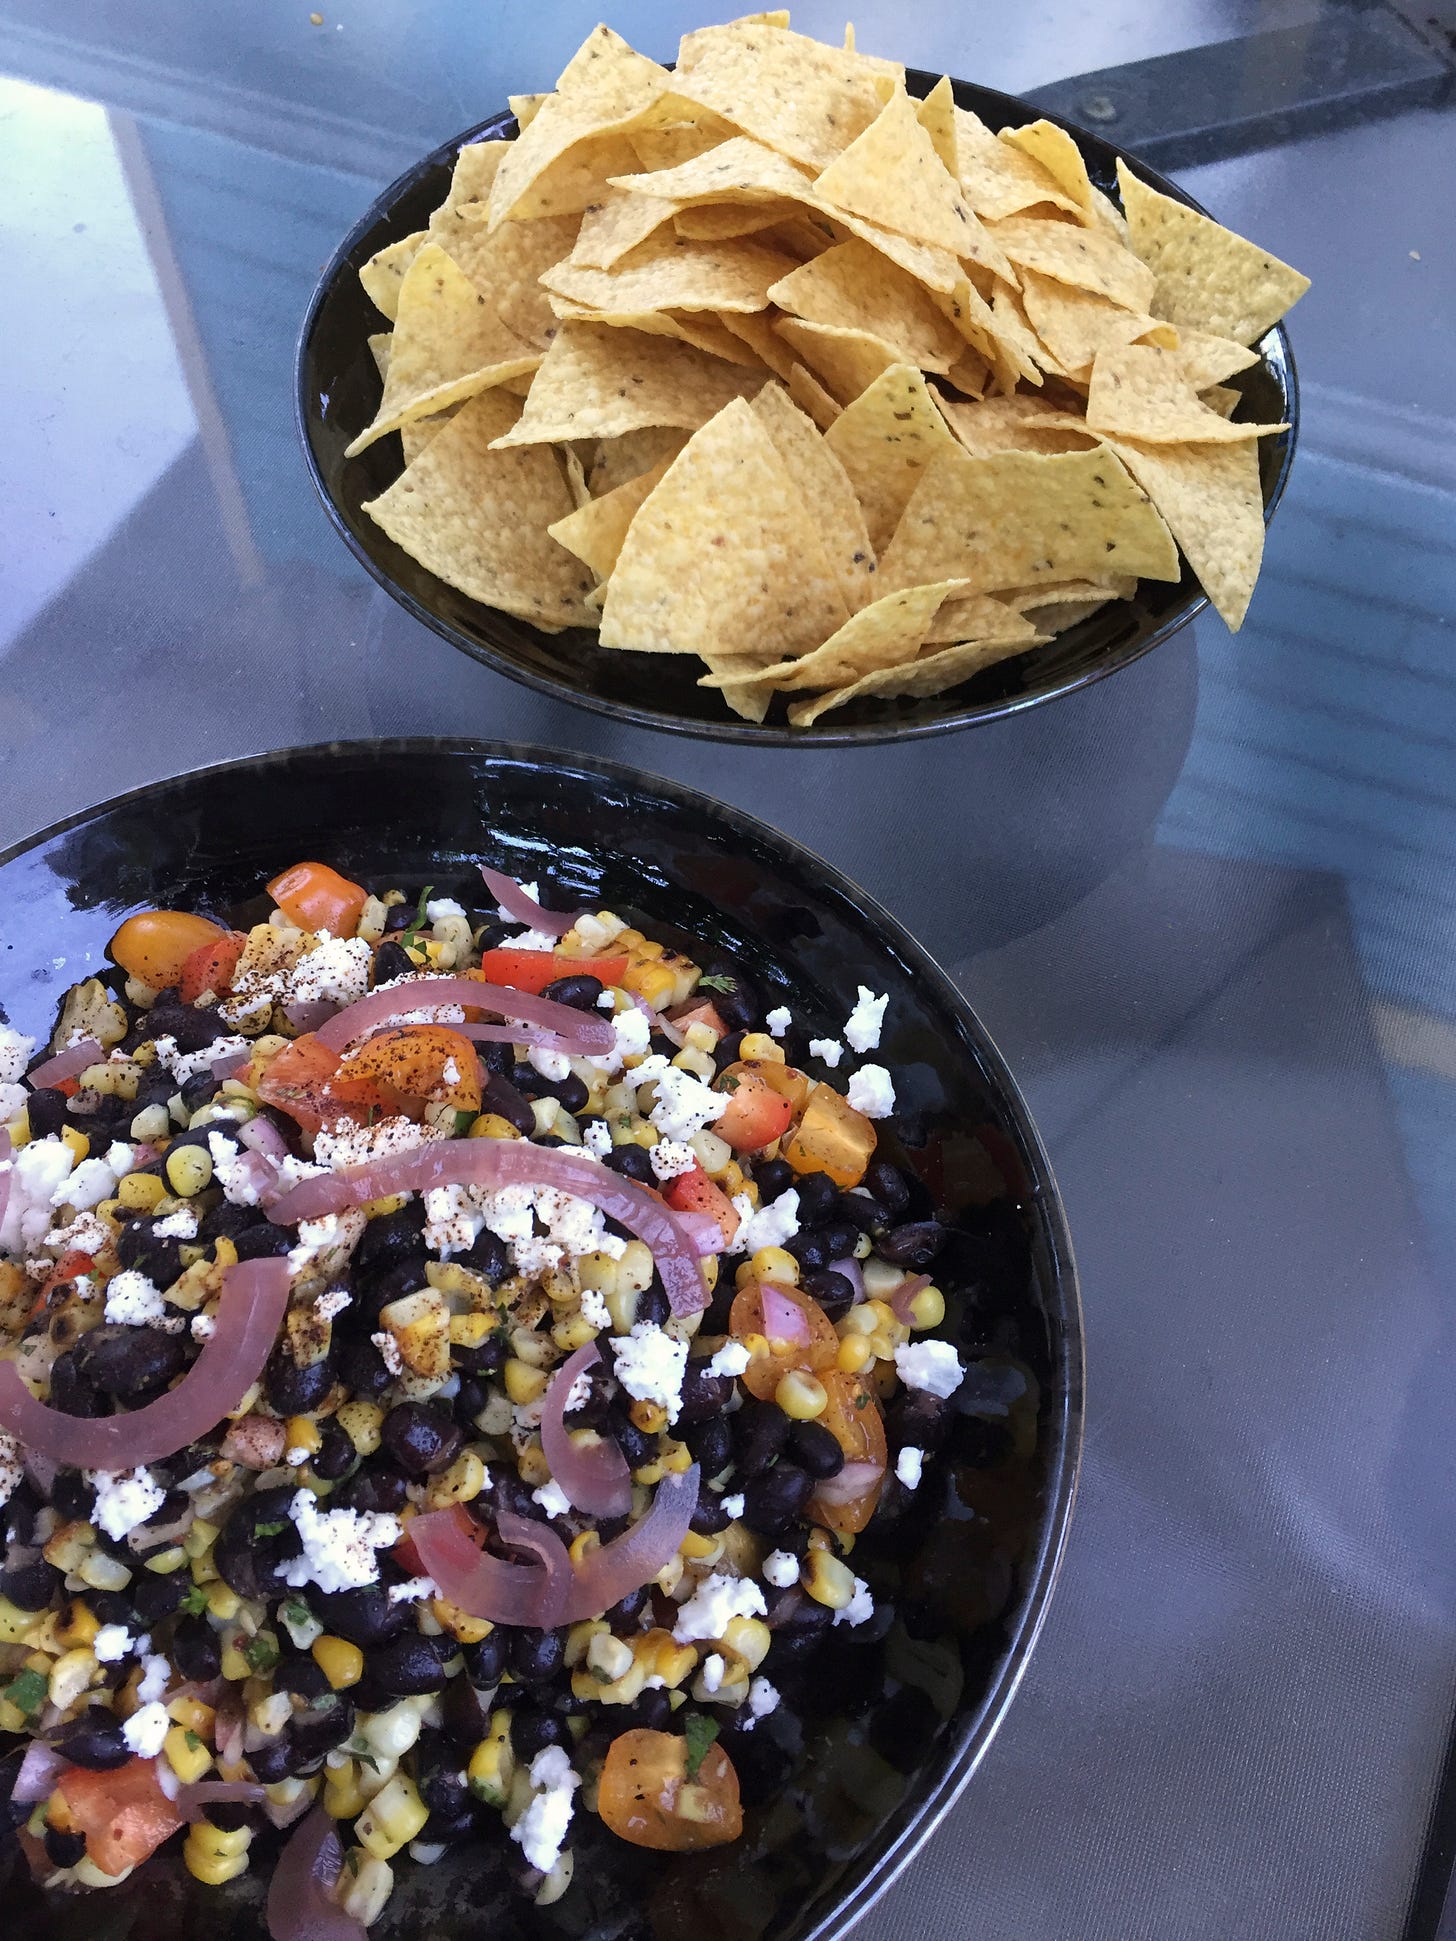 Two shallow black bowls on an outdoor table; one in the background has yellow corn tortilla chips. The one in the foreground has a black bean and corn salad with pieces of tomato and red pepper, and overtop are crumbles of feta and slices of pickled red onion.